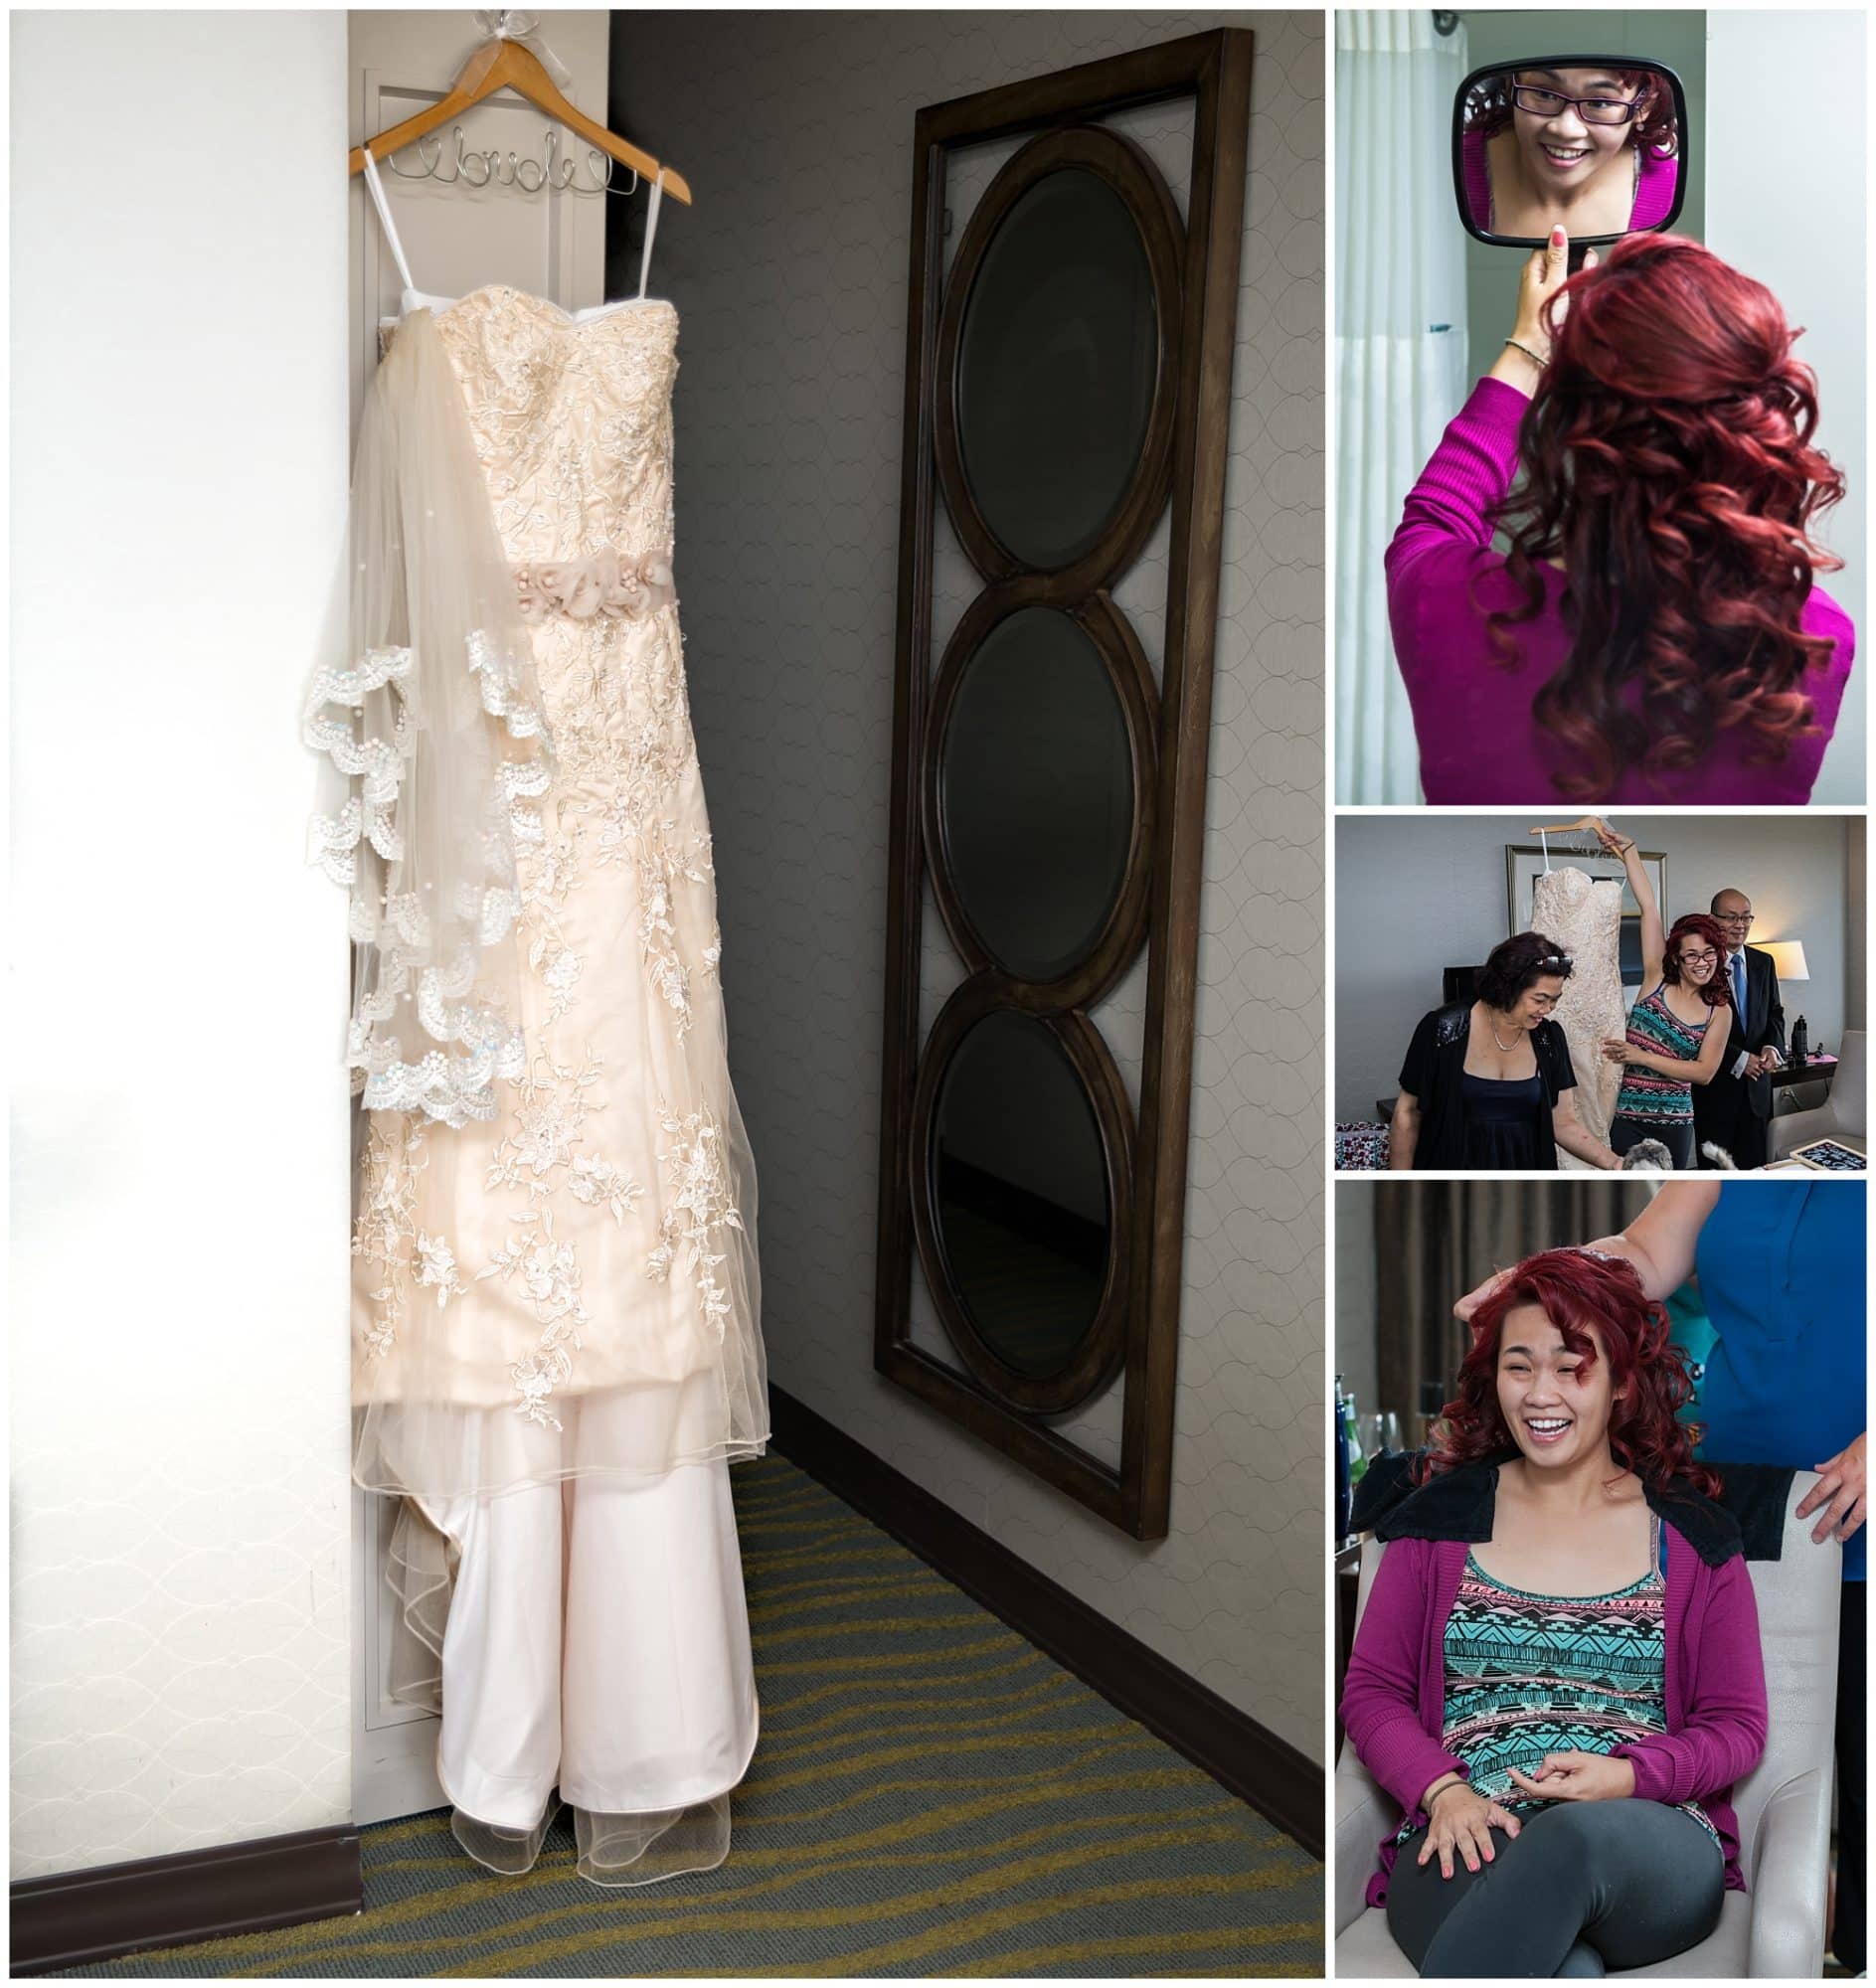 The wedding dress hangs from a door during the bride's bridal prep with her hair at the Atlantica Hotel in Halifax, NS.